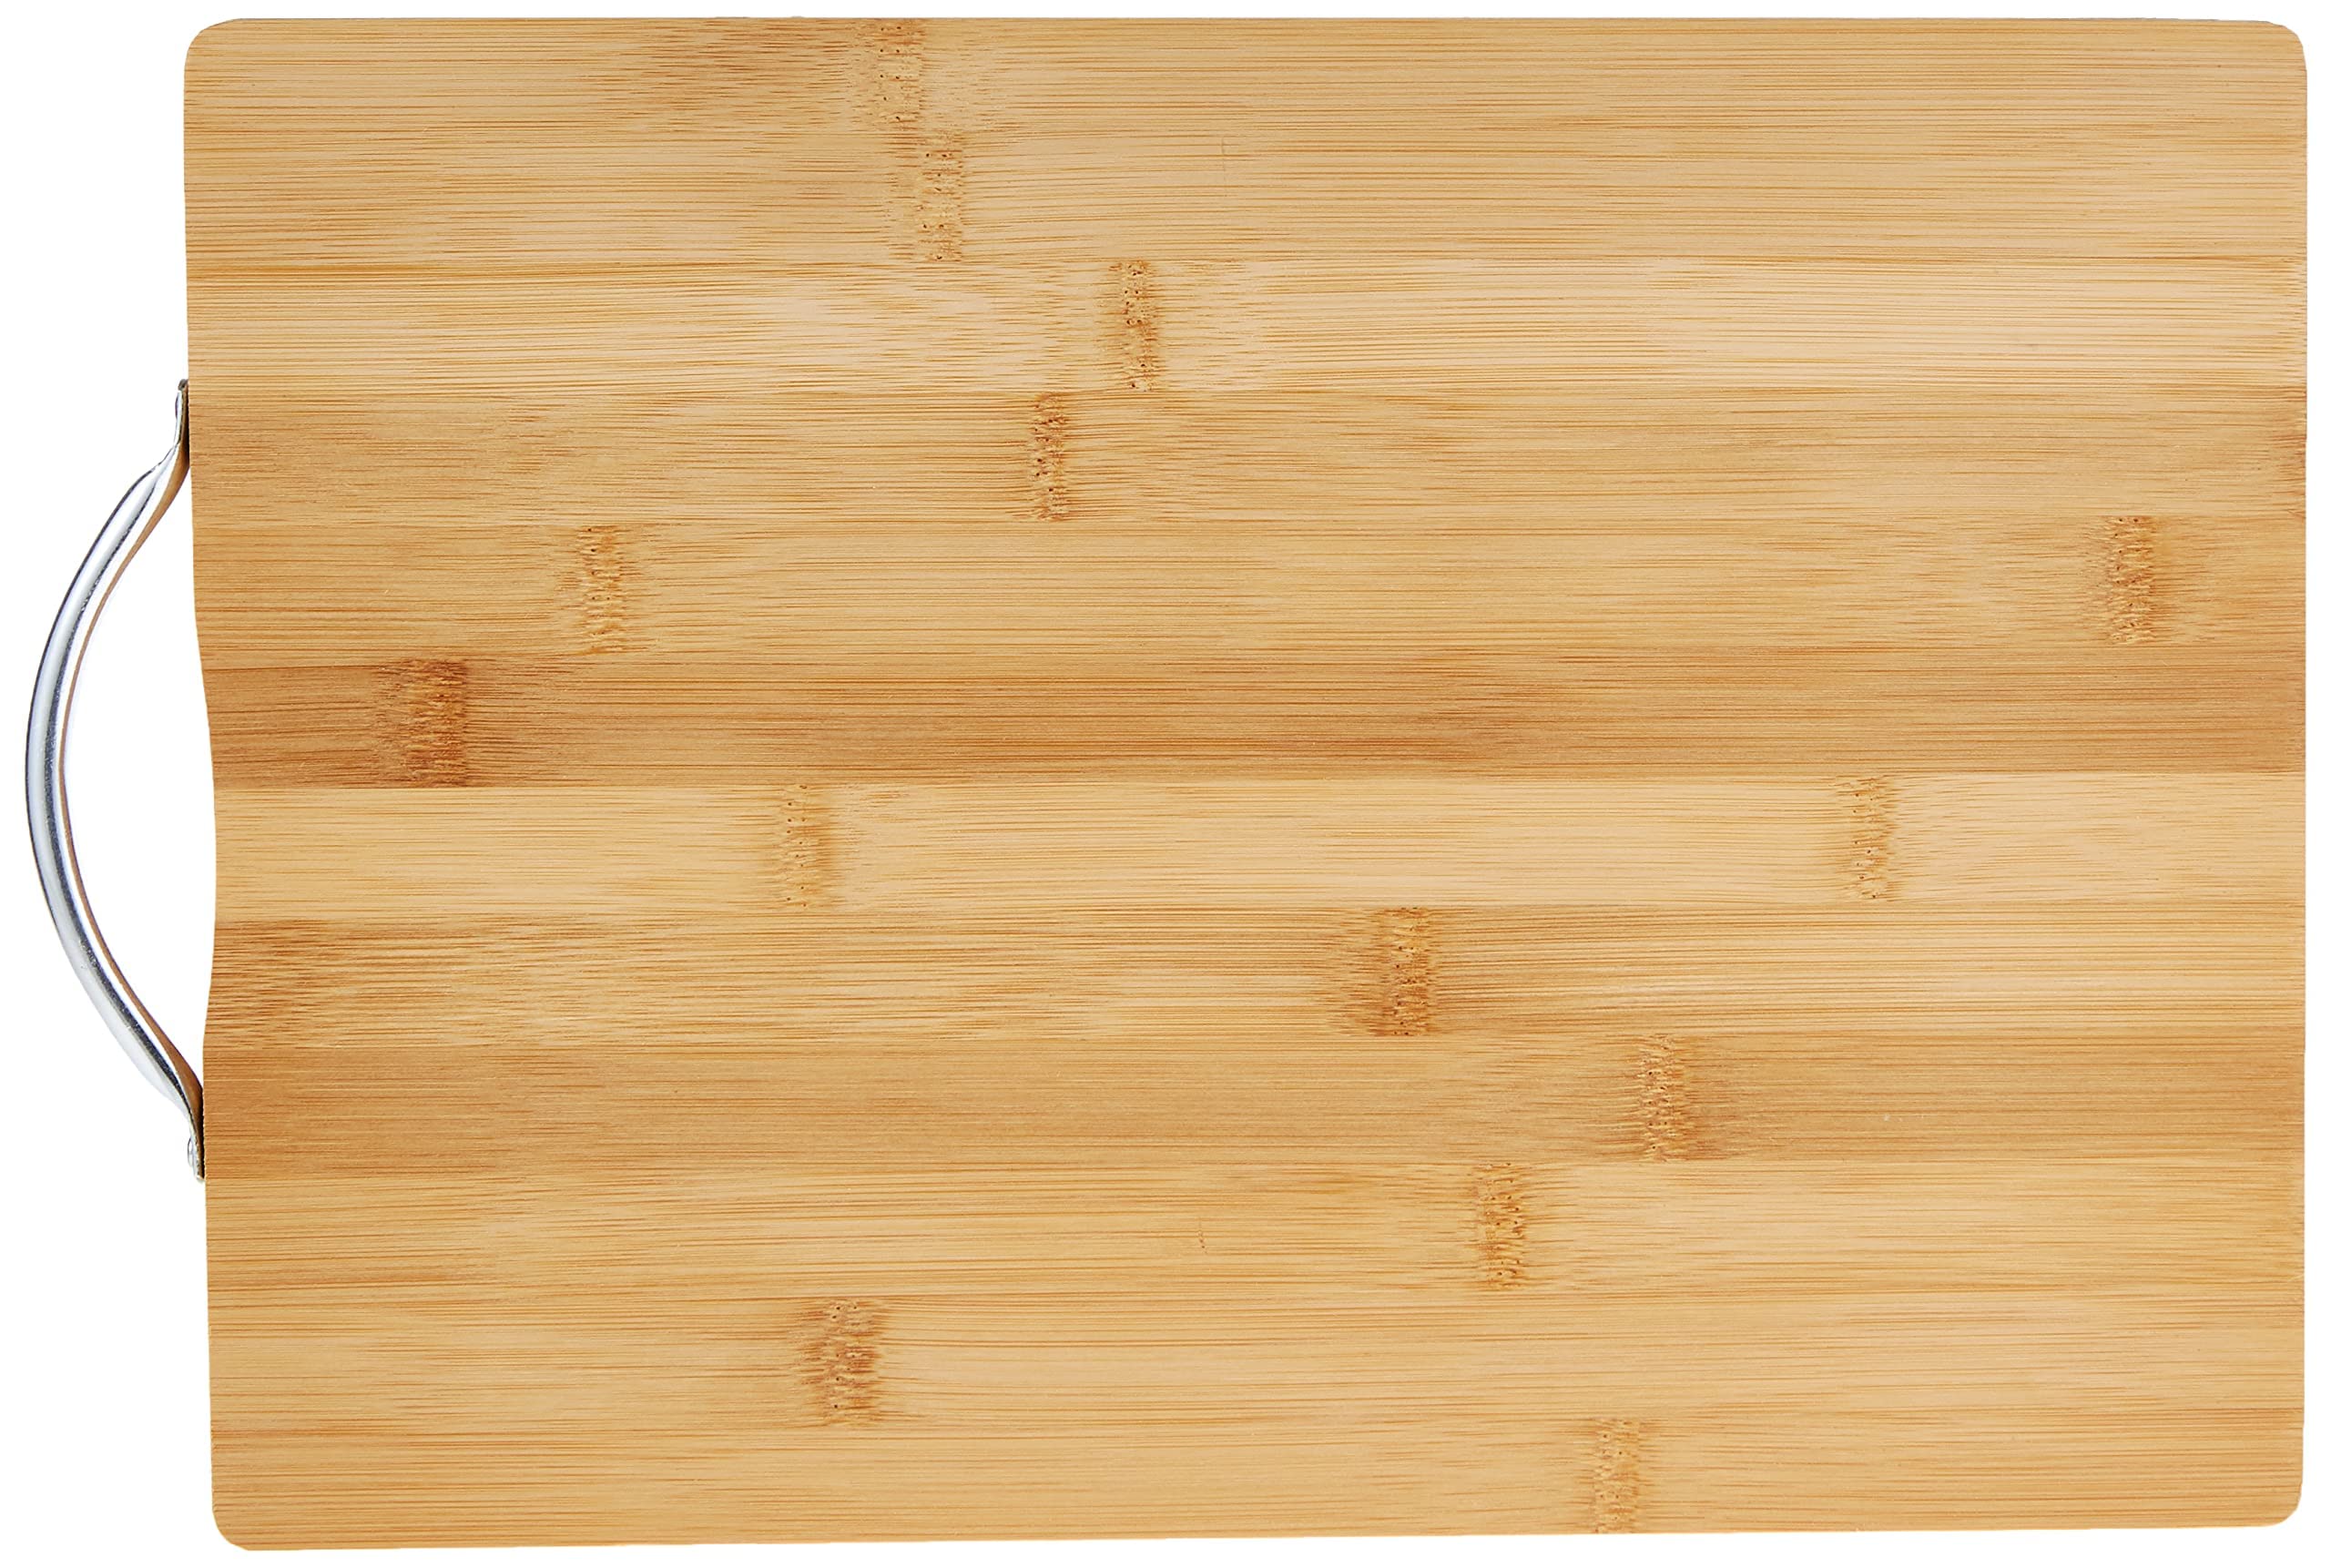 VIO Bamboo cutting board, Wooden Chopping Board, water resistant and long lasting, Best usage in kitchen for chopping meat, cheese, vegetables and fruits